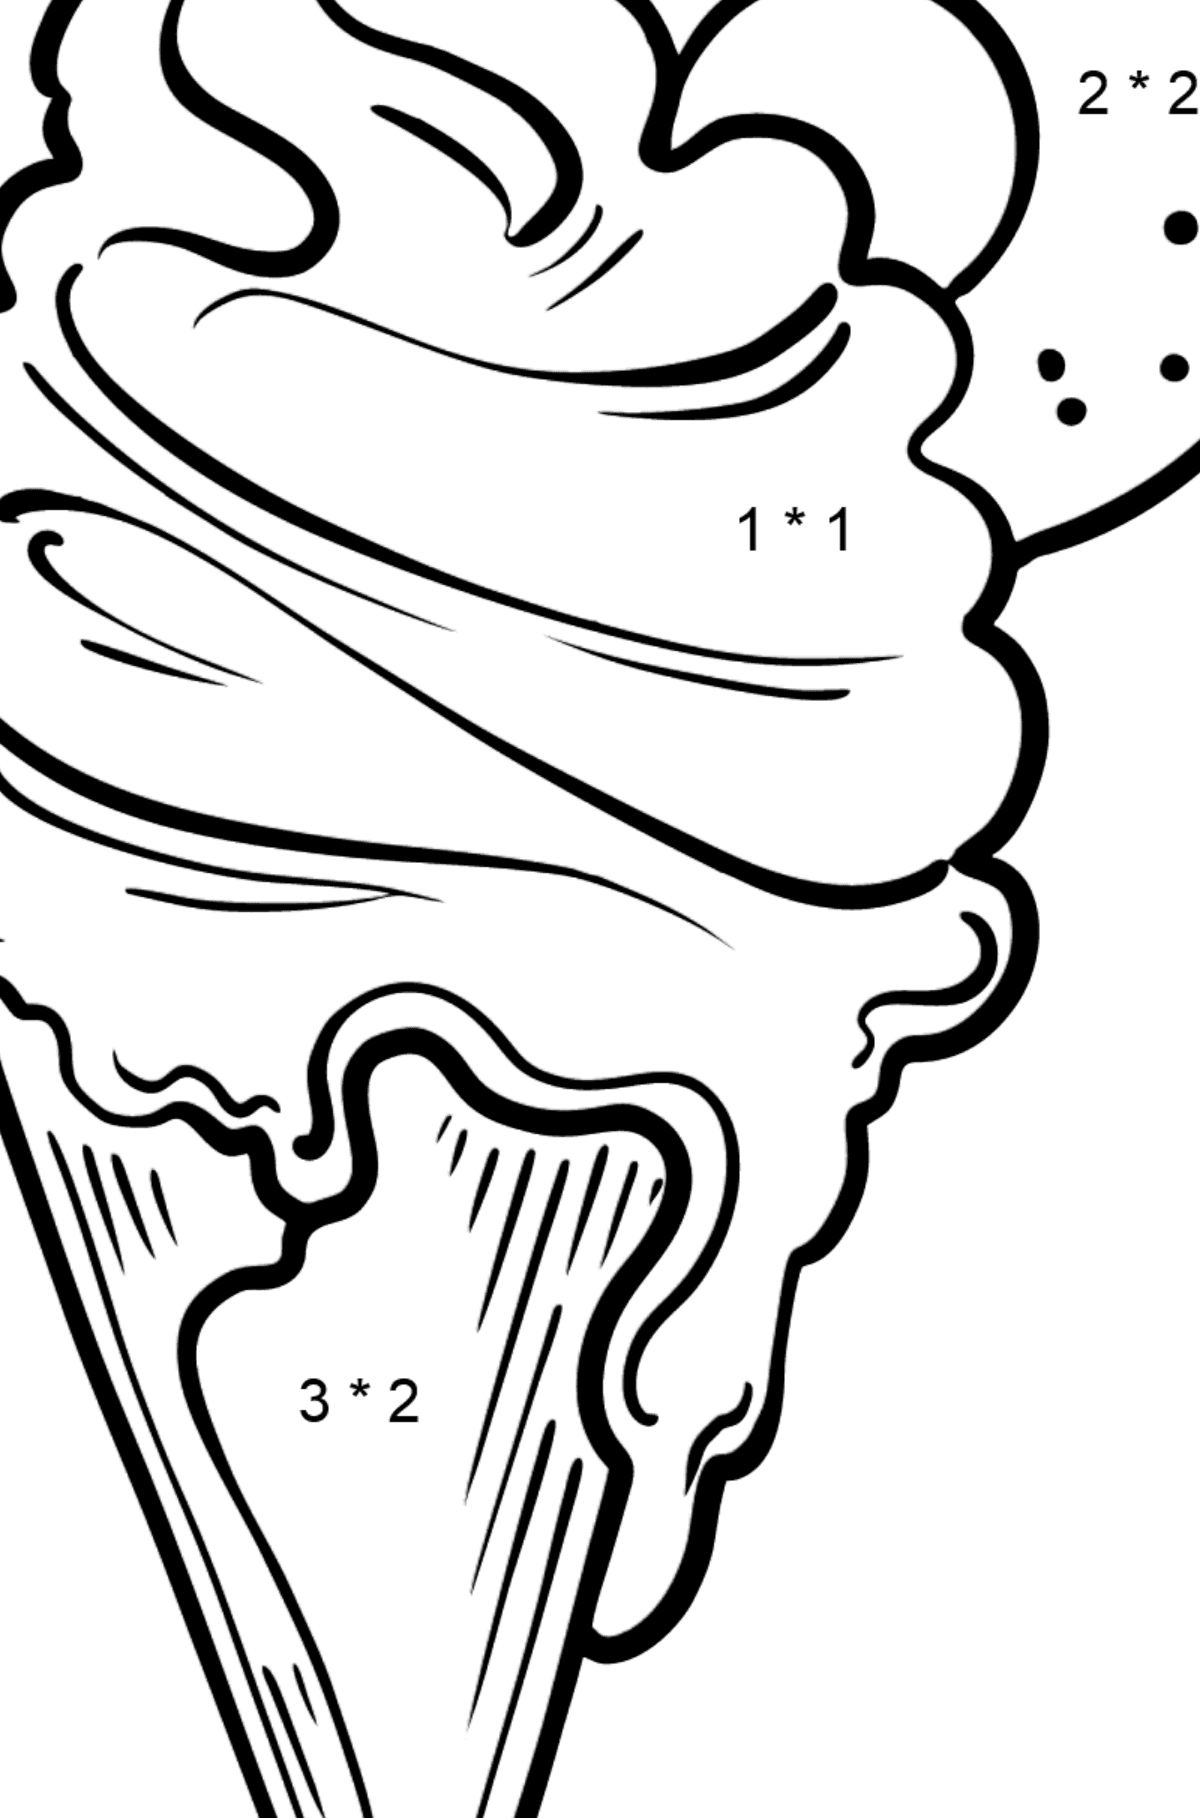 Ice Cream Cone and Pink Lollipop coloring page - Math Coloring - Multiplication for Kids